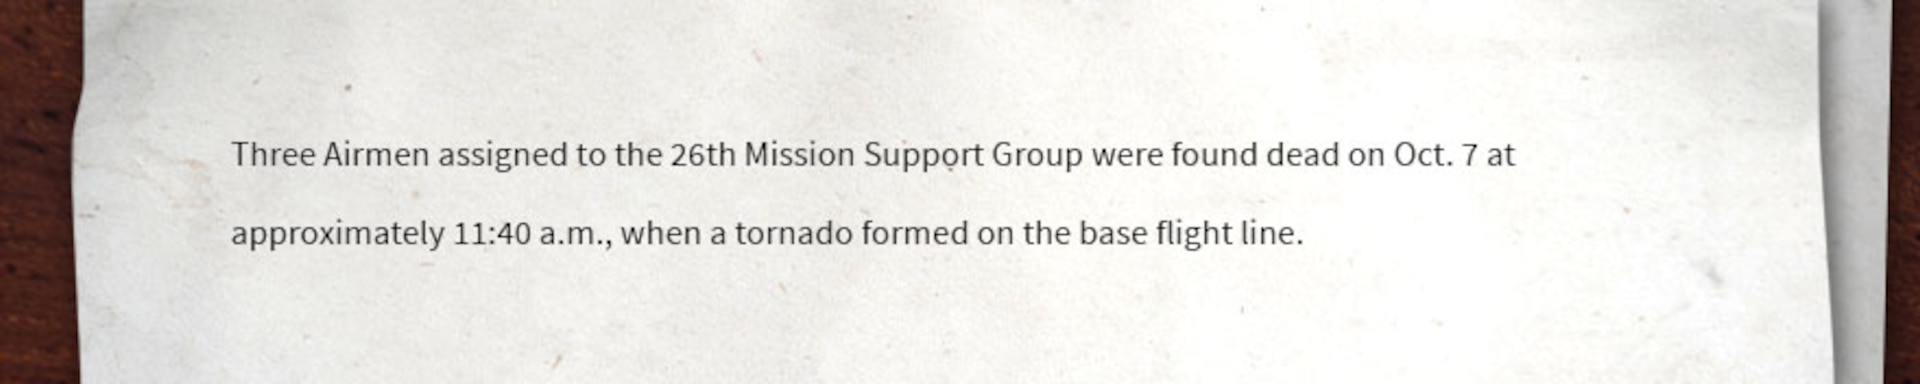 Image of text that reads, "Three Airmen assigned to the 26th Mission Support Group were found dead on Oct. 7 at approximately 11:40 a.m., when a tornado formed on the base flight line."